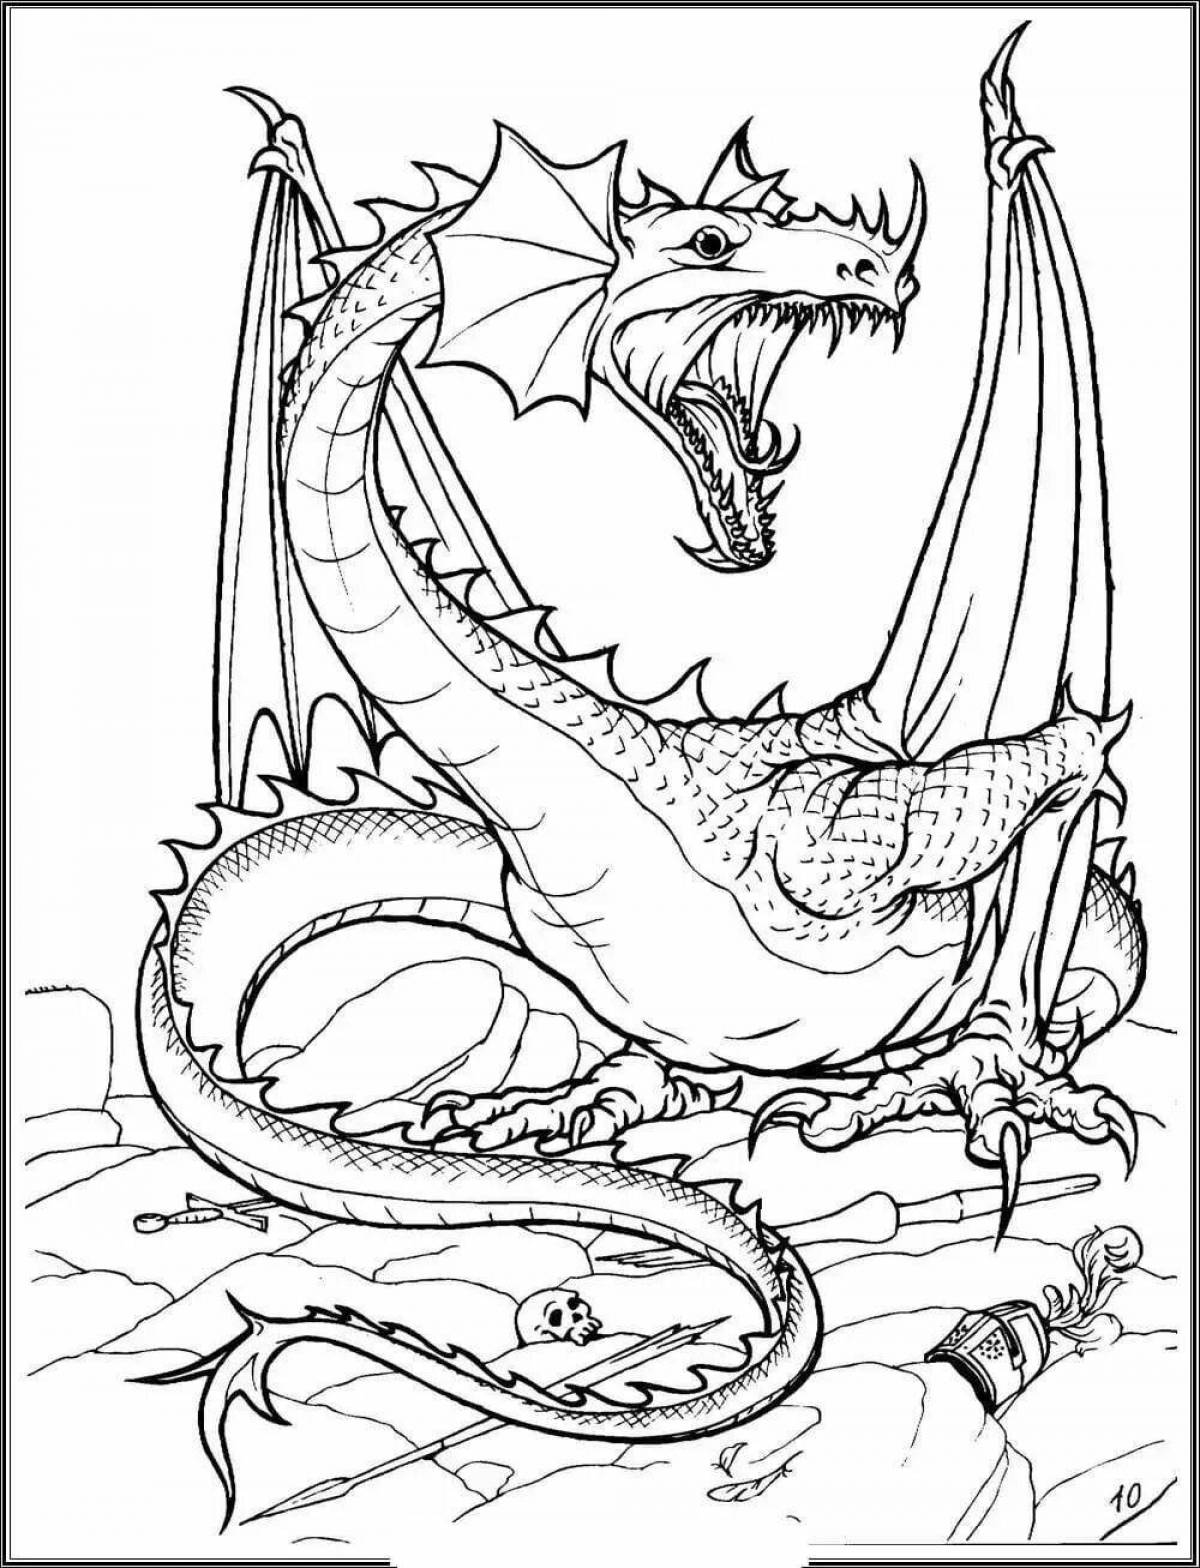 Charming coloring dragons of the nine worlds